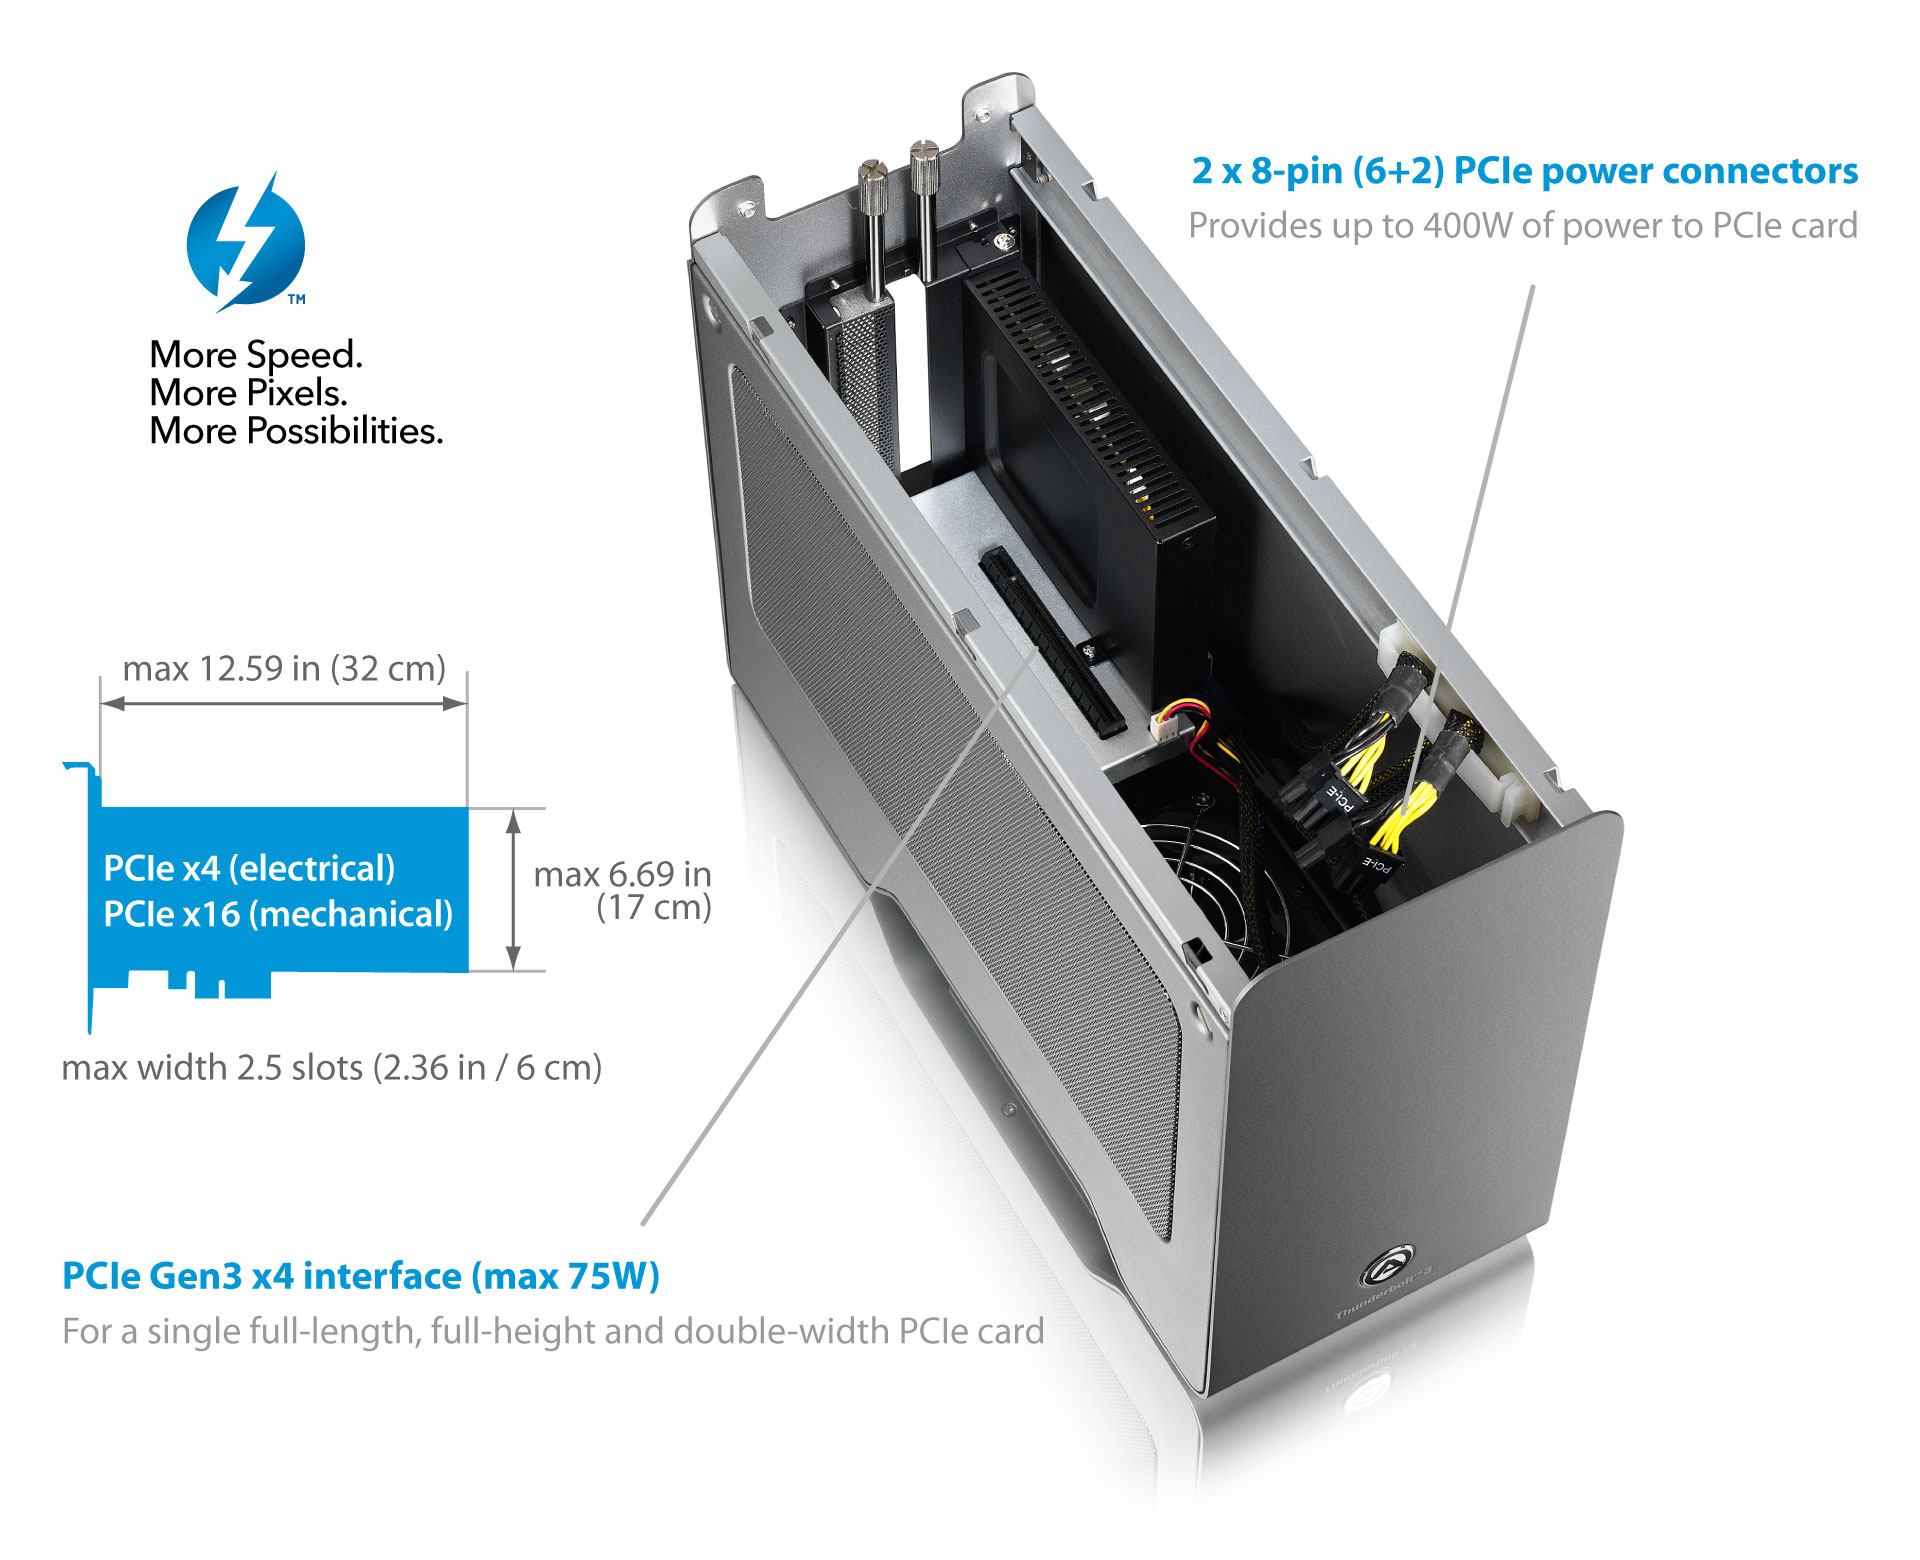 Node Pro - Thunderbolt 3 PCIe Expansion Chassis with PD | AKiTiO